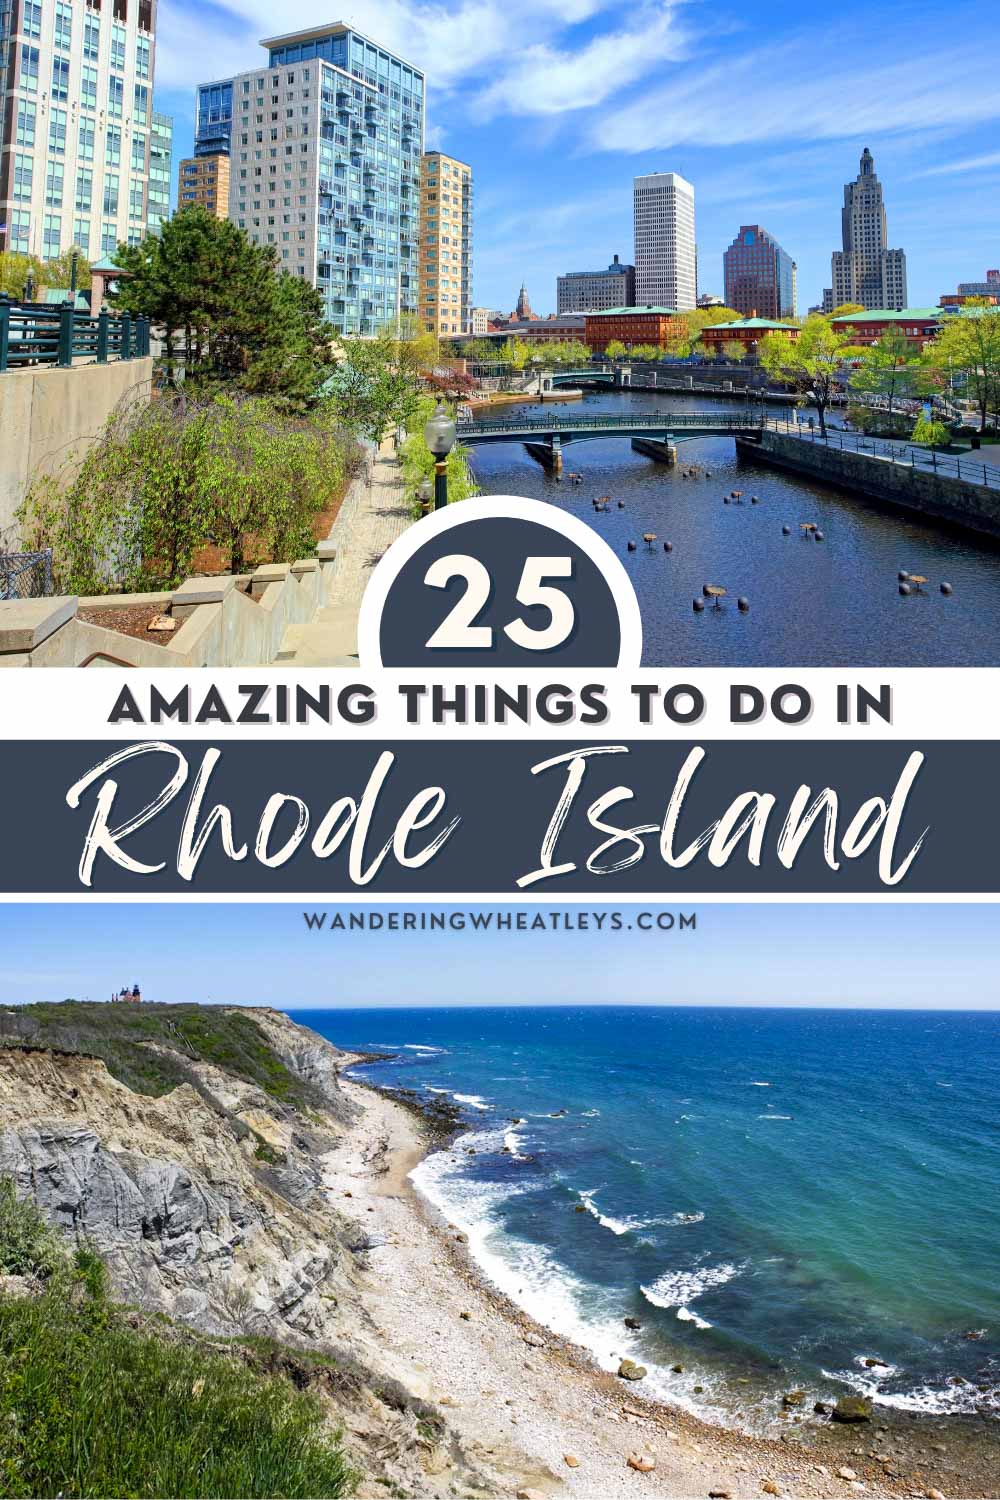 The Best Things to do in Rhode Island